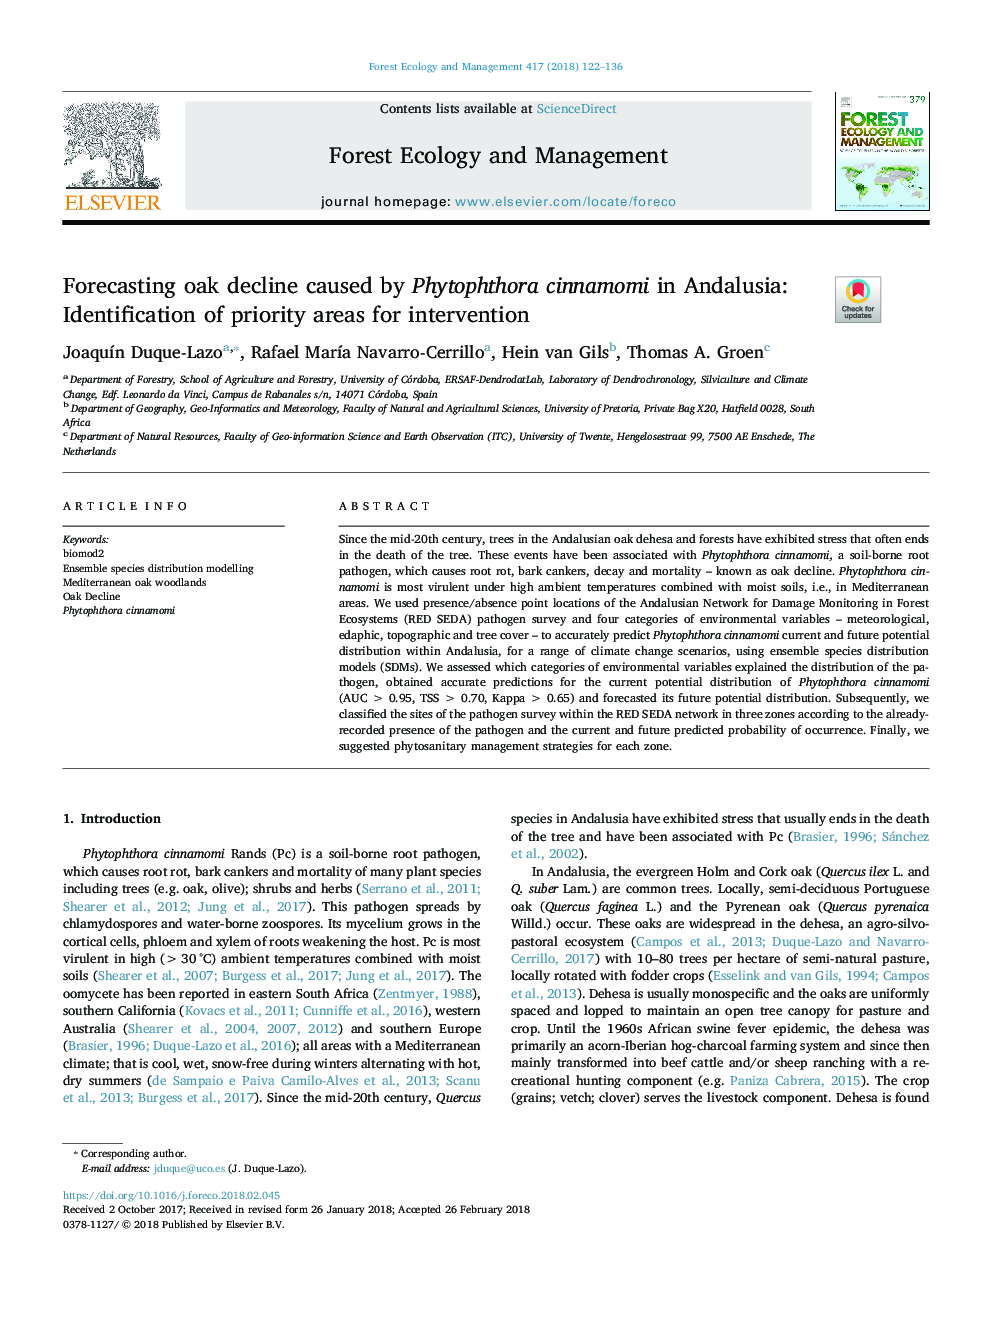 Forecasting oak decline caused by Phytophthora cinnamomi in Andalusia: Identification of priority areas for intervention